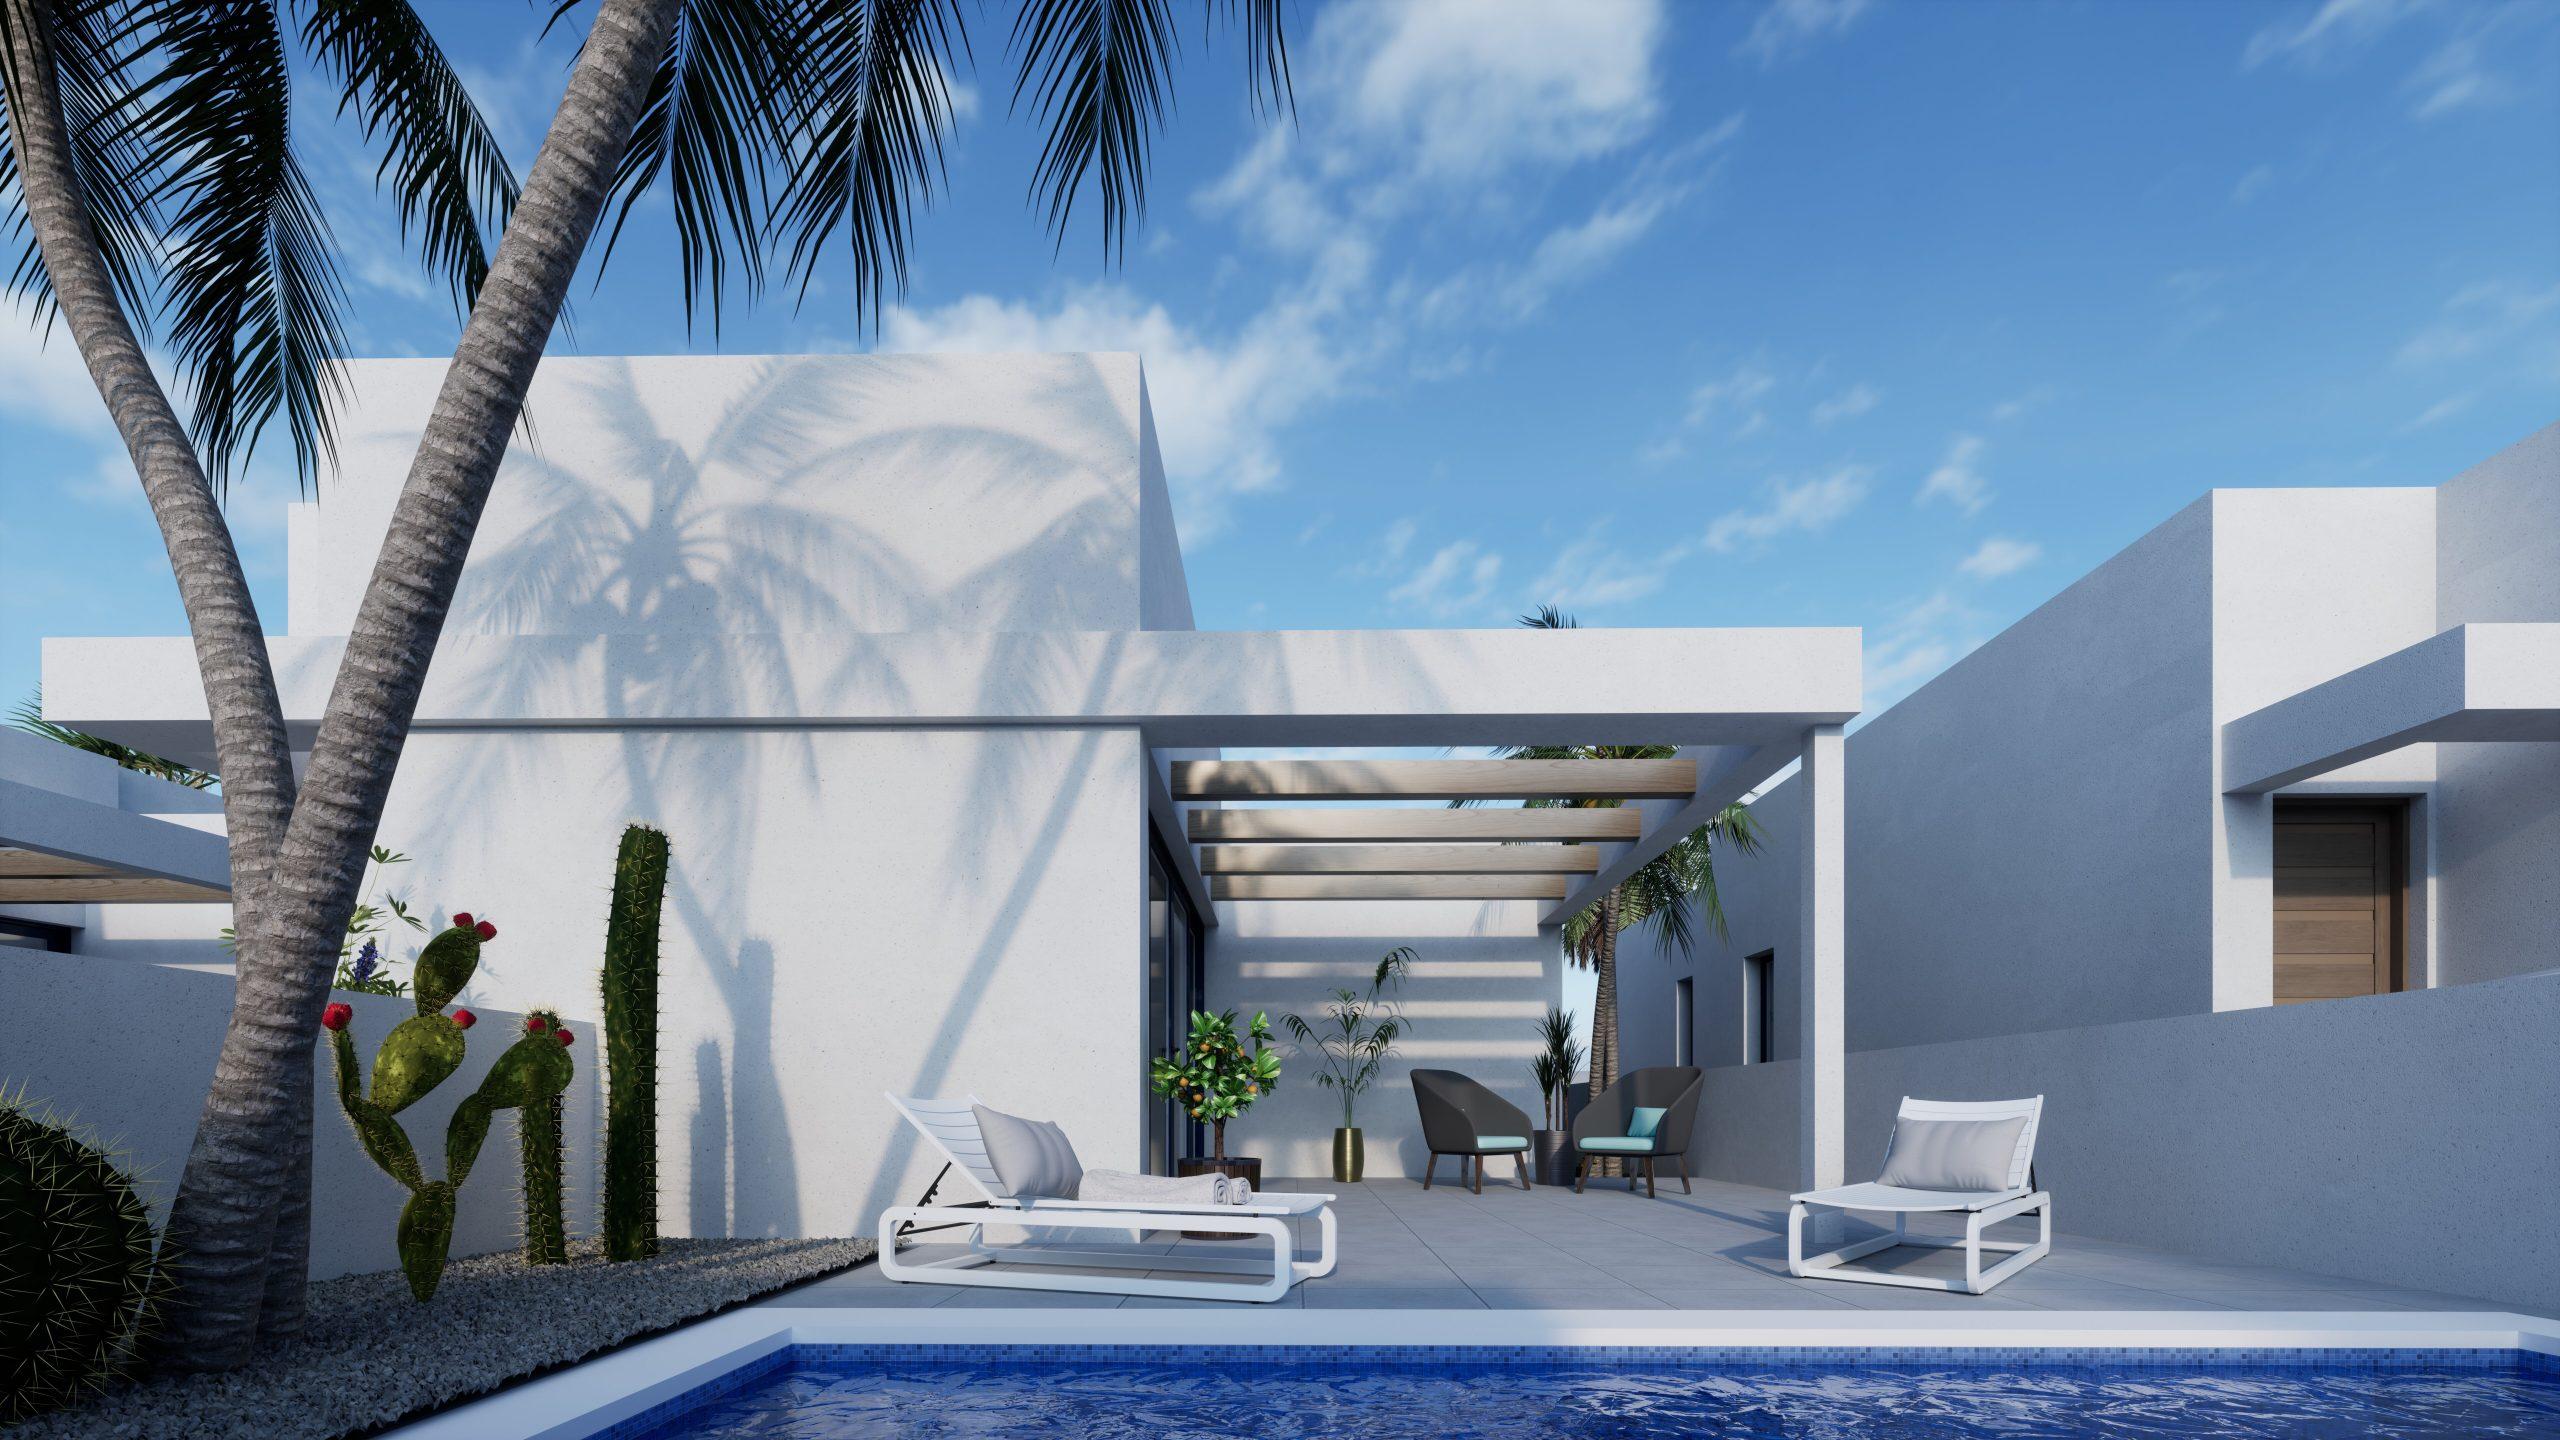 New Build Detached 3 Bedroom Villas in Playa Blanca with Private Pool and Proximity to Marina Rubicon